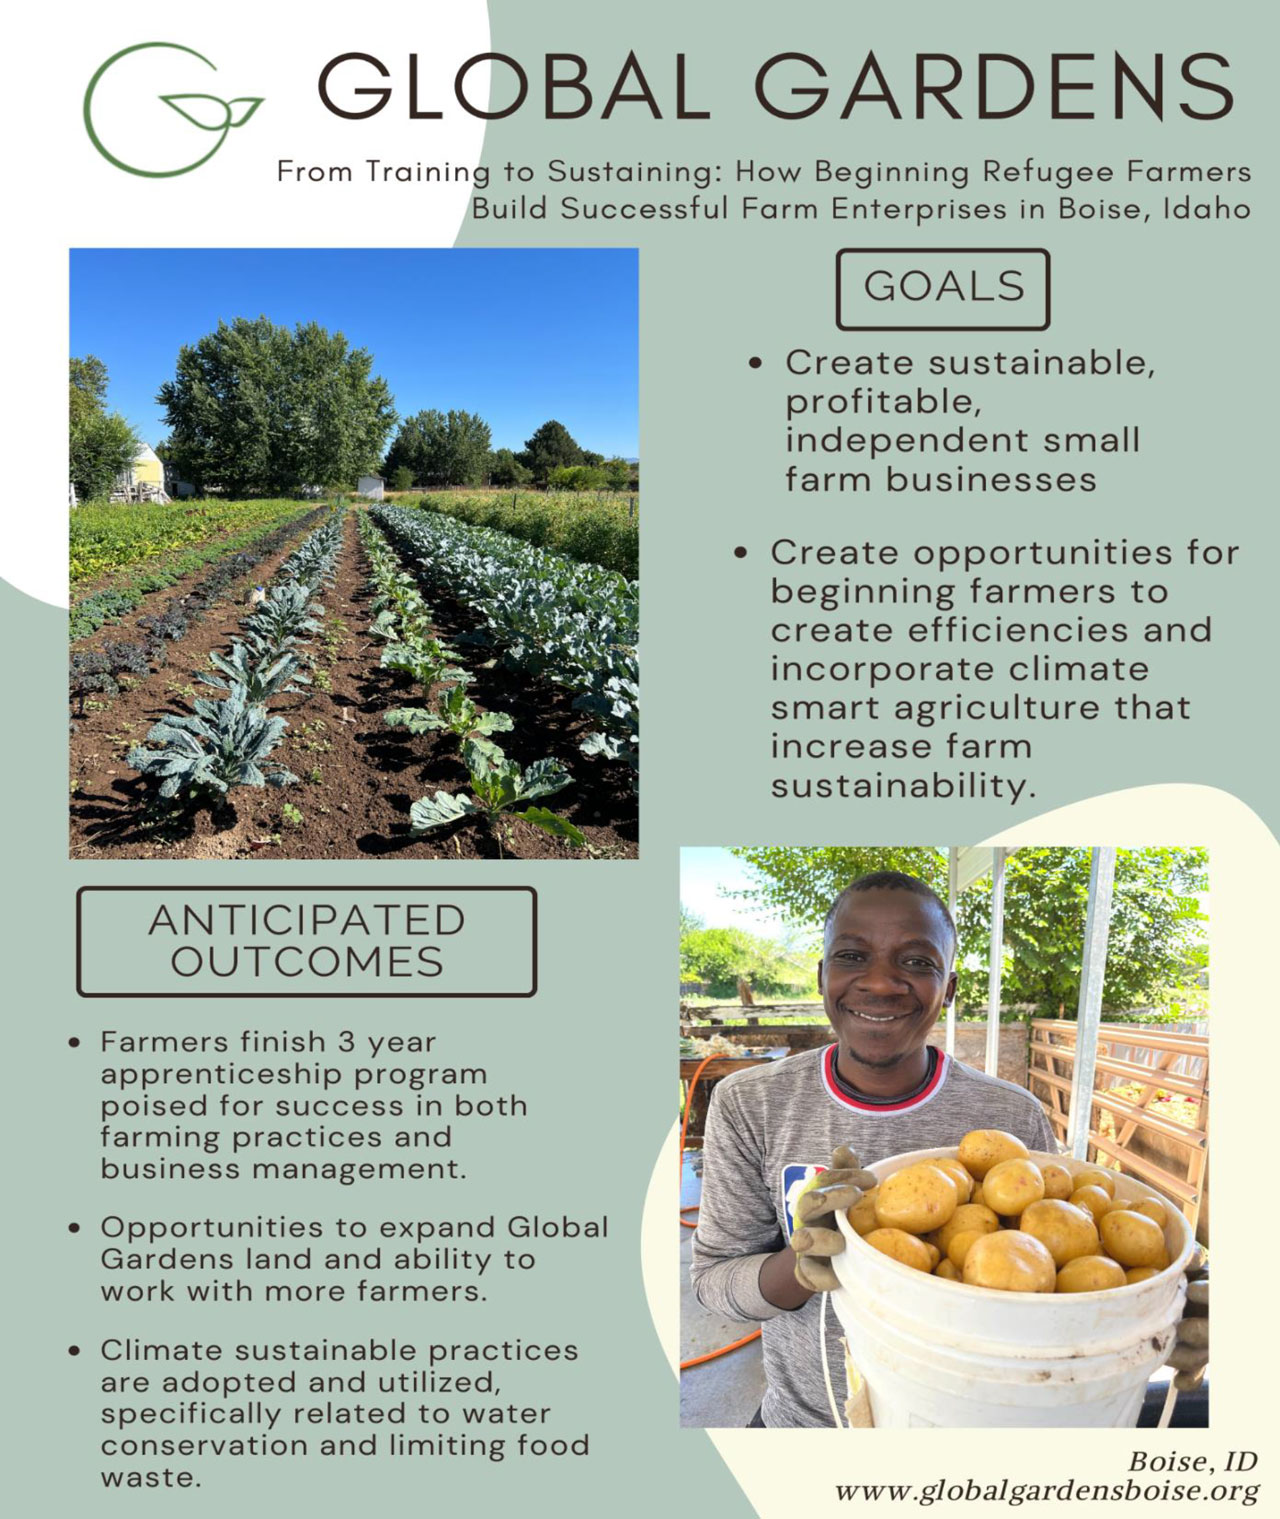 From Training to Sustaining How Beginning Refugee Farmers Build Successful Farm Enterprises poster